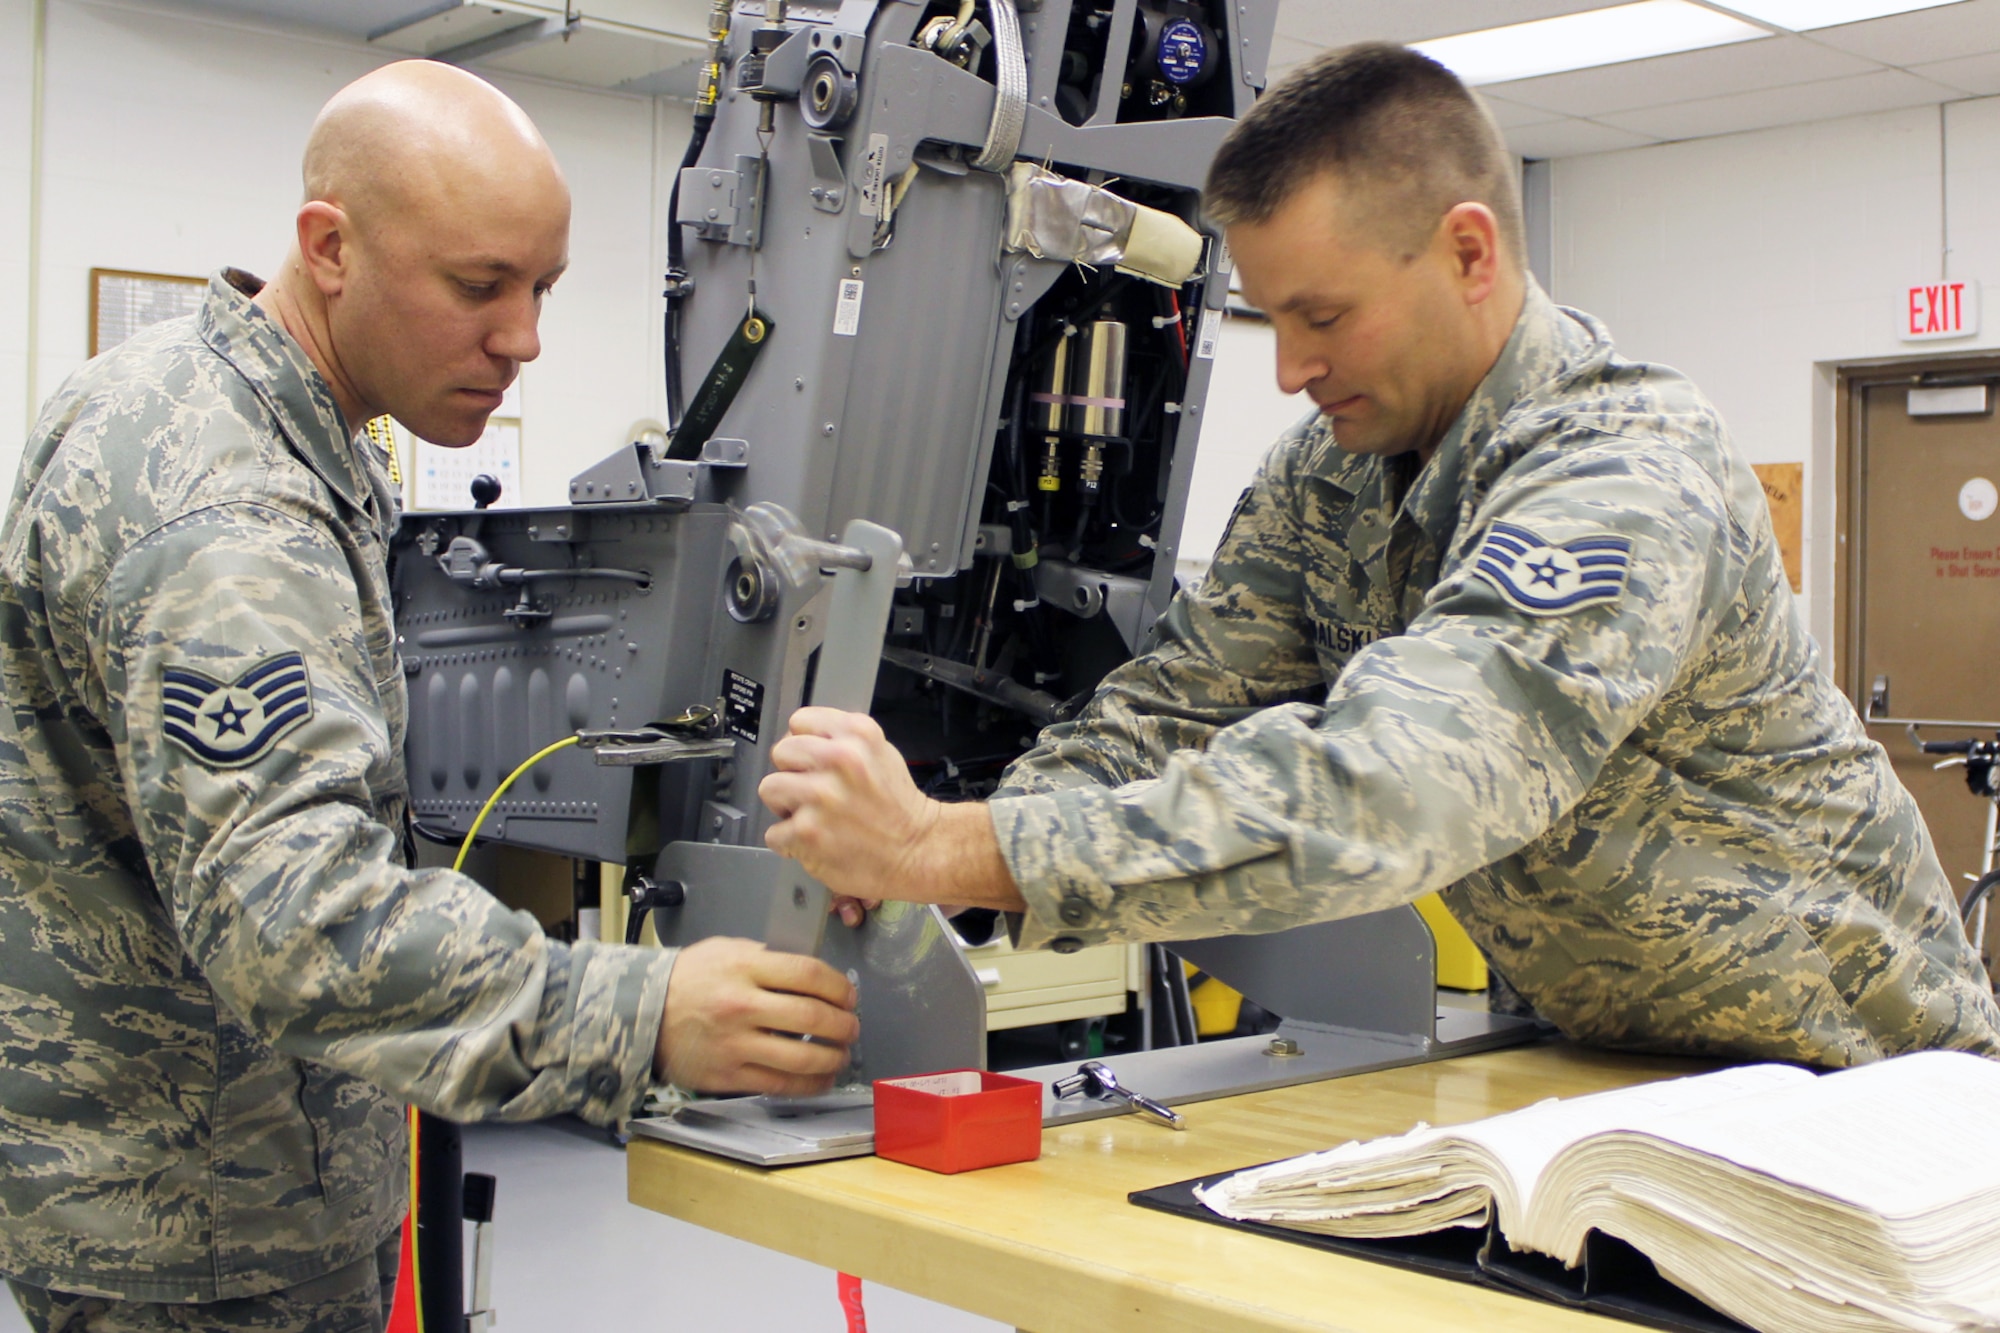 Staff Sgt. Jared Kowalski (right) and Staff Sgt. Nathan Henkel perform routine, scheduled maintenance on the ACES-II ejection seat system in their role as egress technicians for the 127th Maintenance Squadron at Selfridge Air National Guard Base, Mich. The seat is used on the A-10 Thunderbolt II aircraft, which may be eliminated from Selfridge under a pending Air Force budget proposal. (U.S. Air Force photo by TSgt. Dan Heaton)